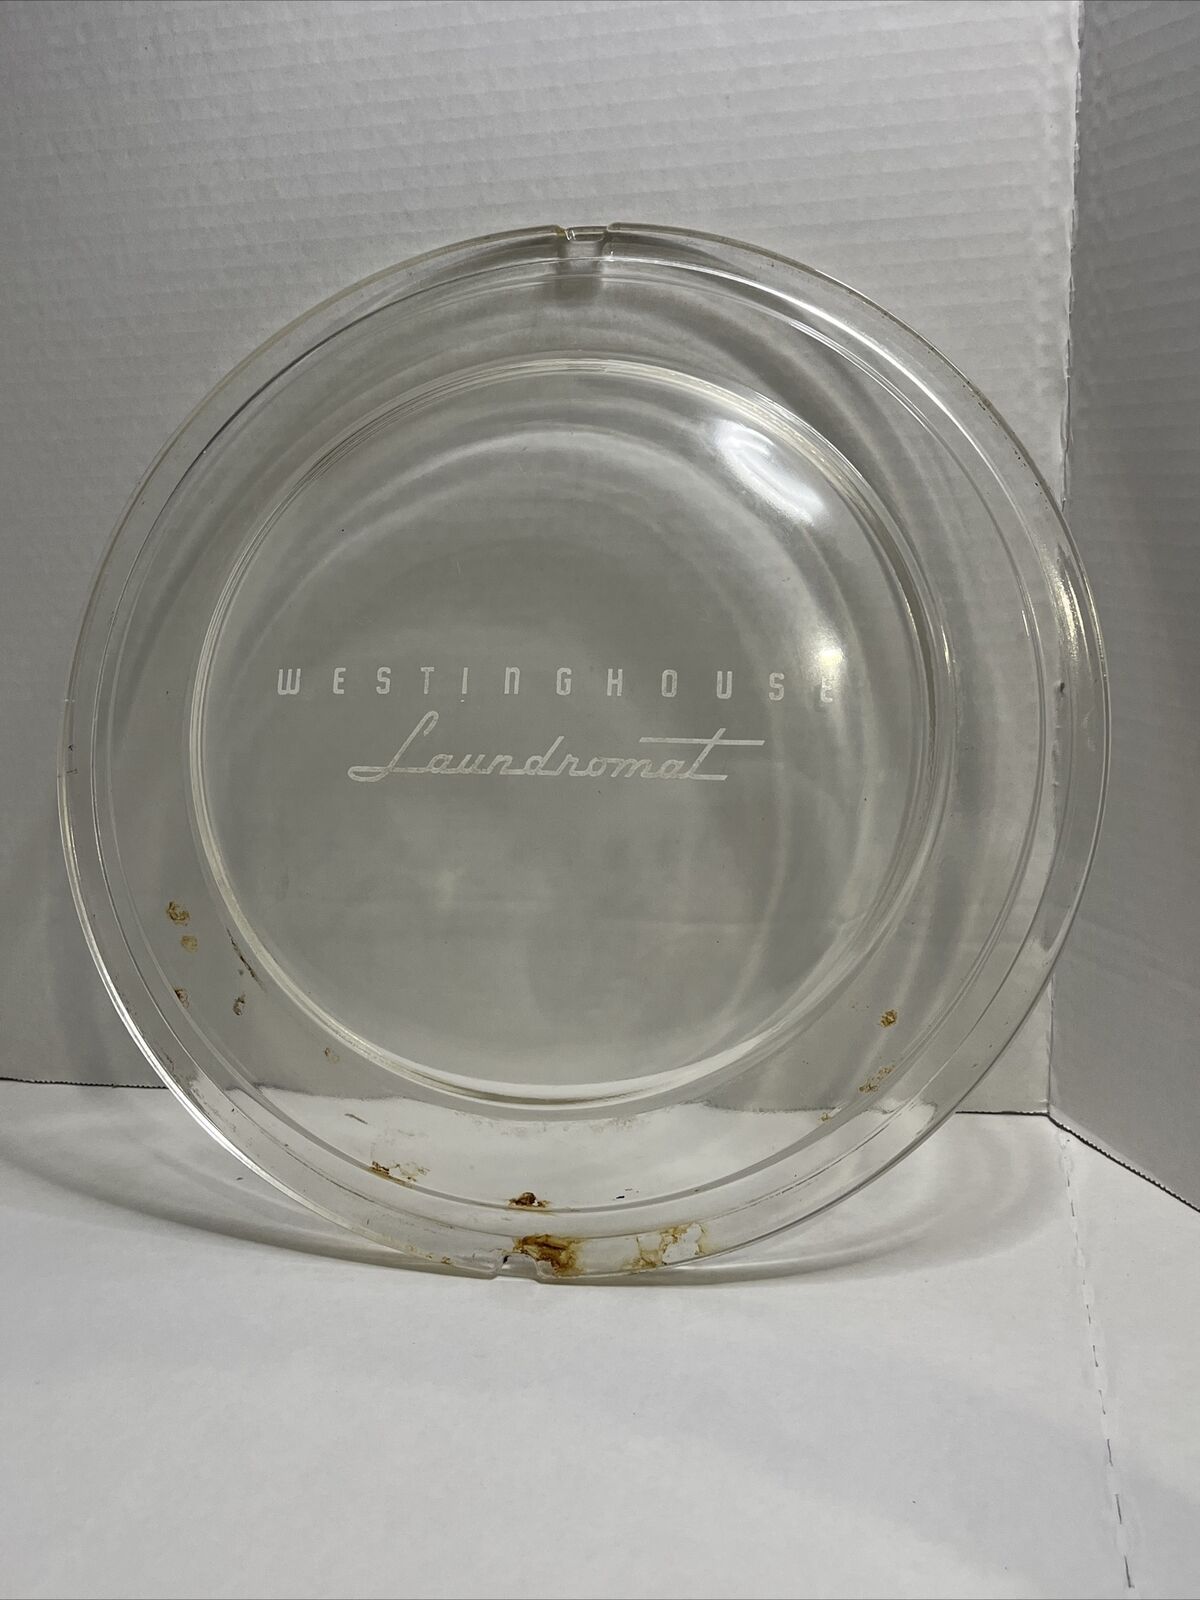 Vtg Genuine Westinghouse Washer Laundromat Rare Round glass window. Collectible